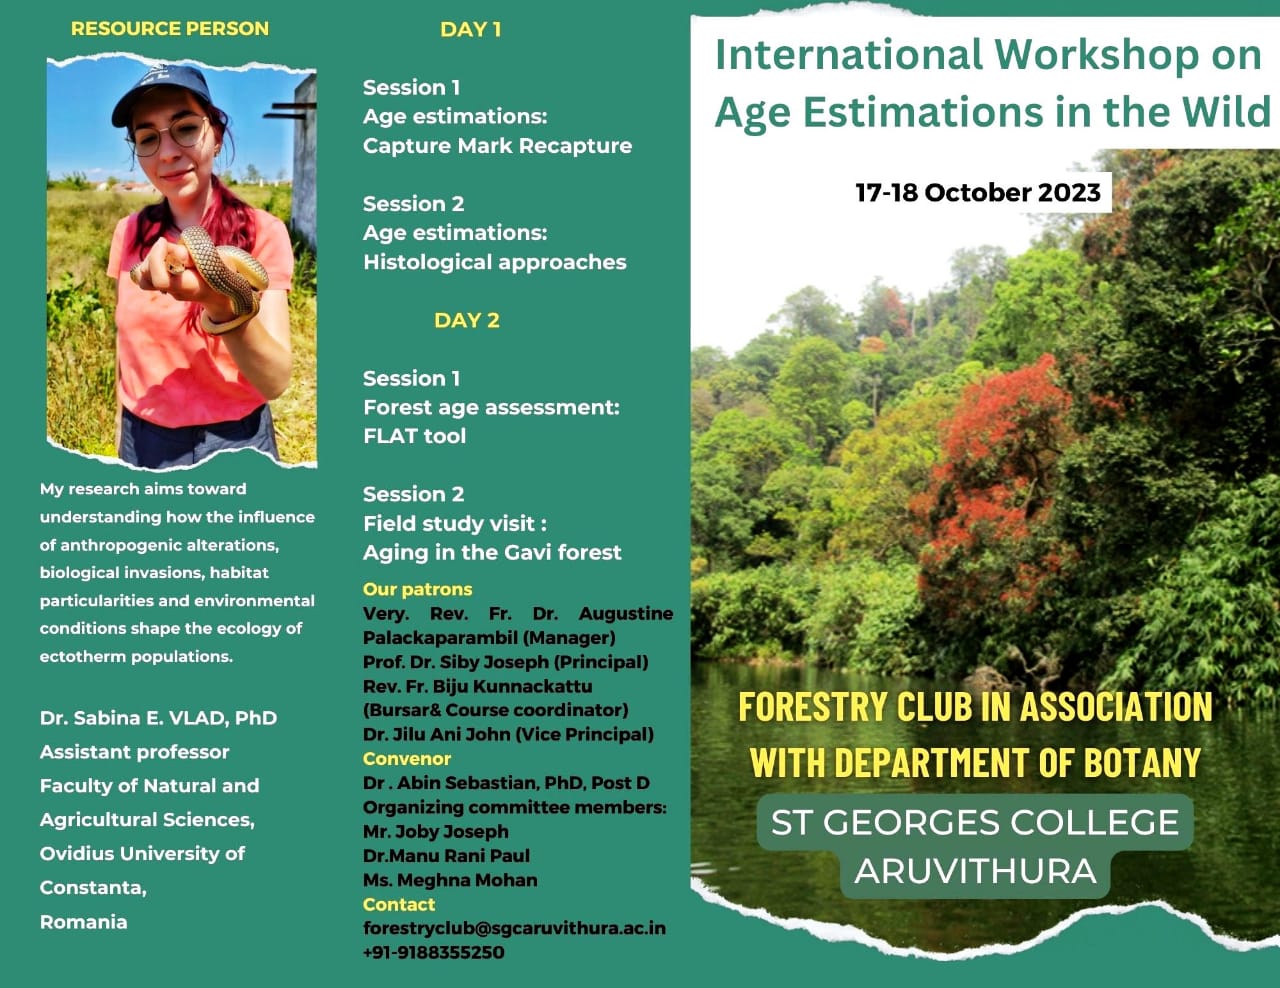 International Workshop on Age Estimations in the Wild